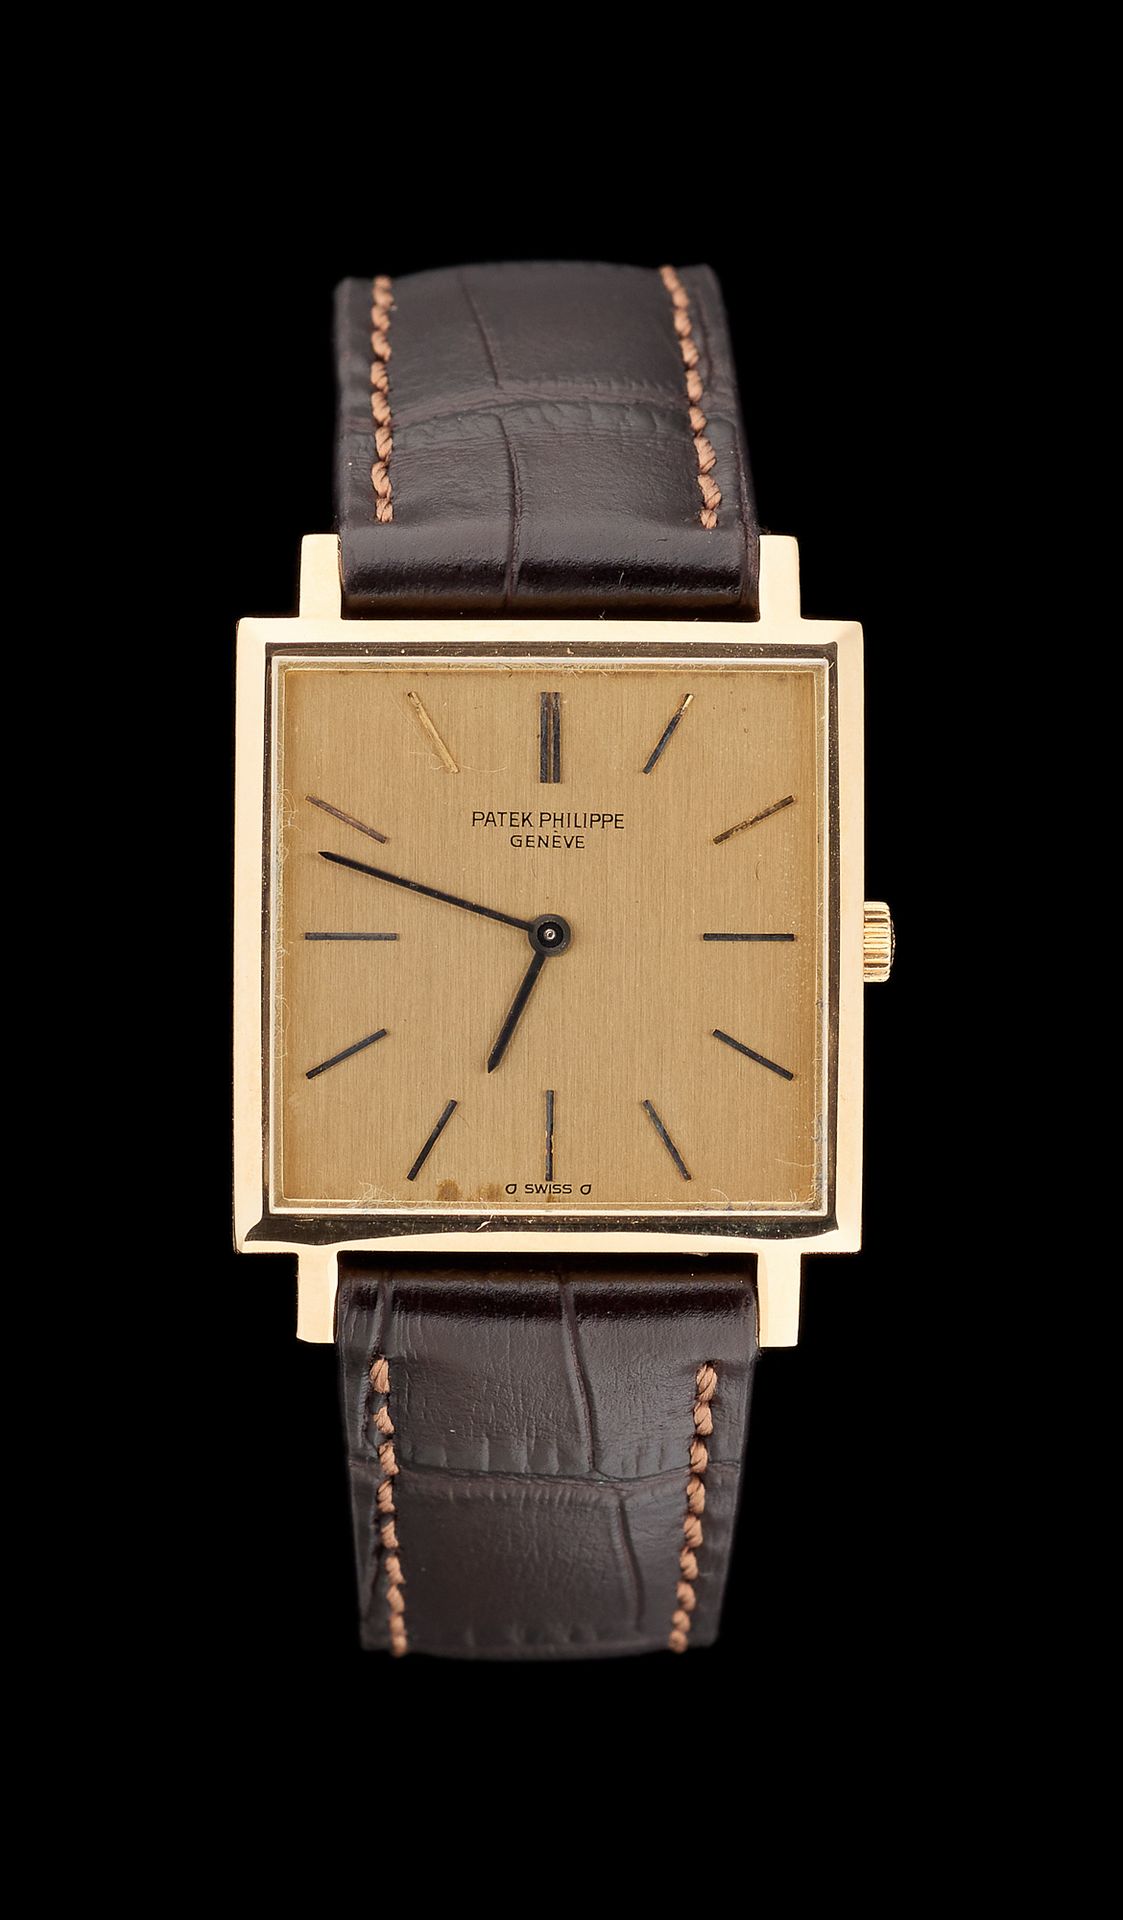 PATEK PHILIPPE. Watches: Yellow gold men's wristwatch with winding movement.

Pa&hellip;